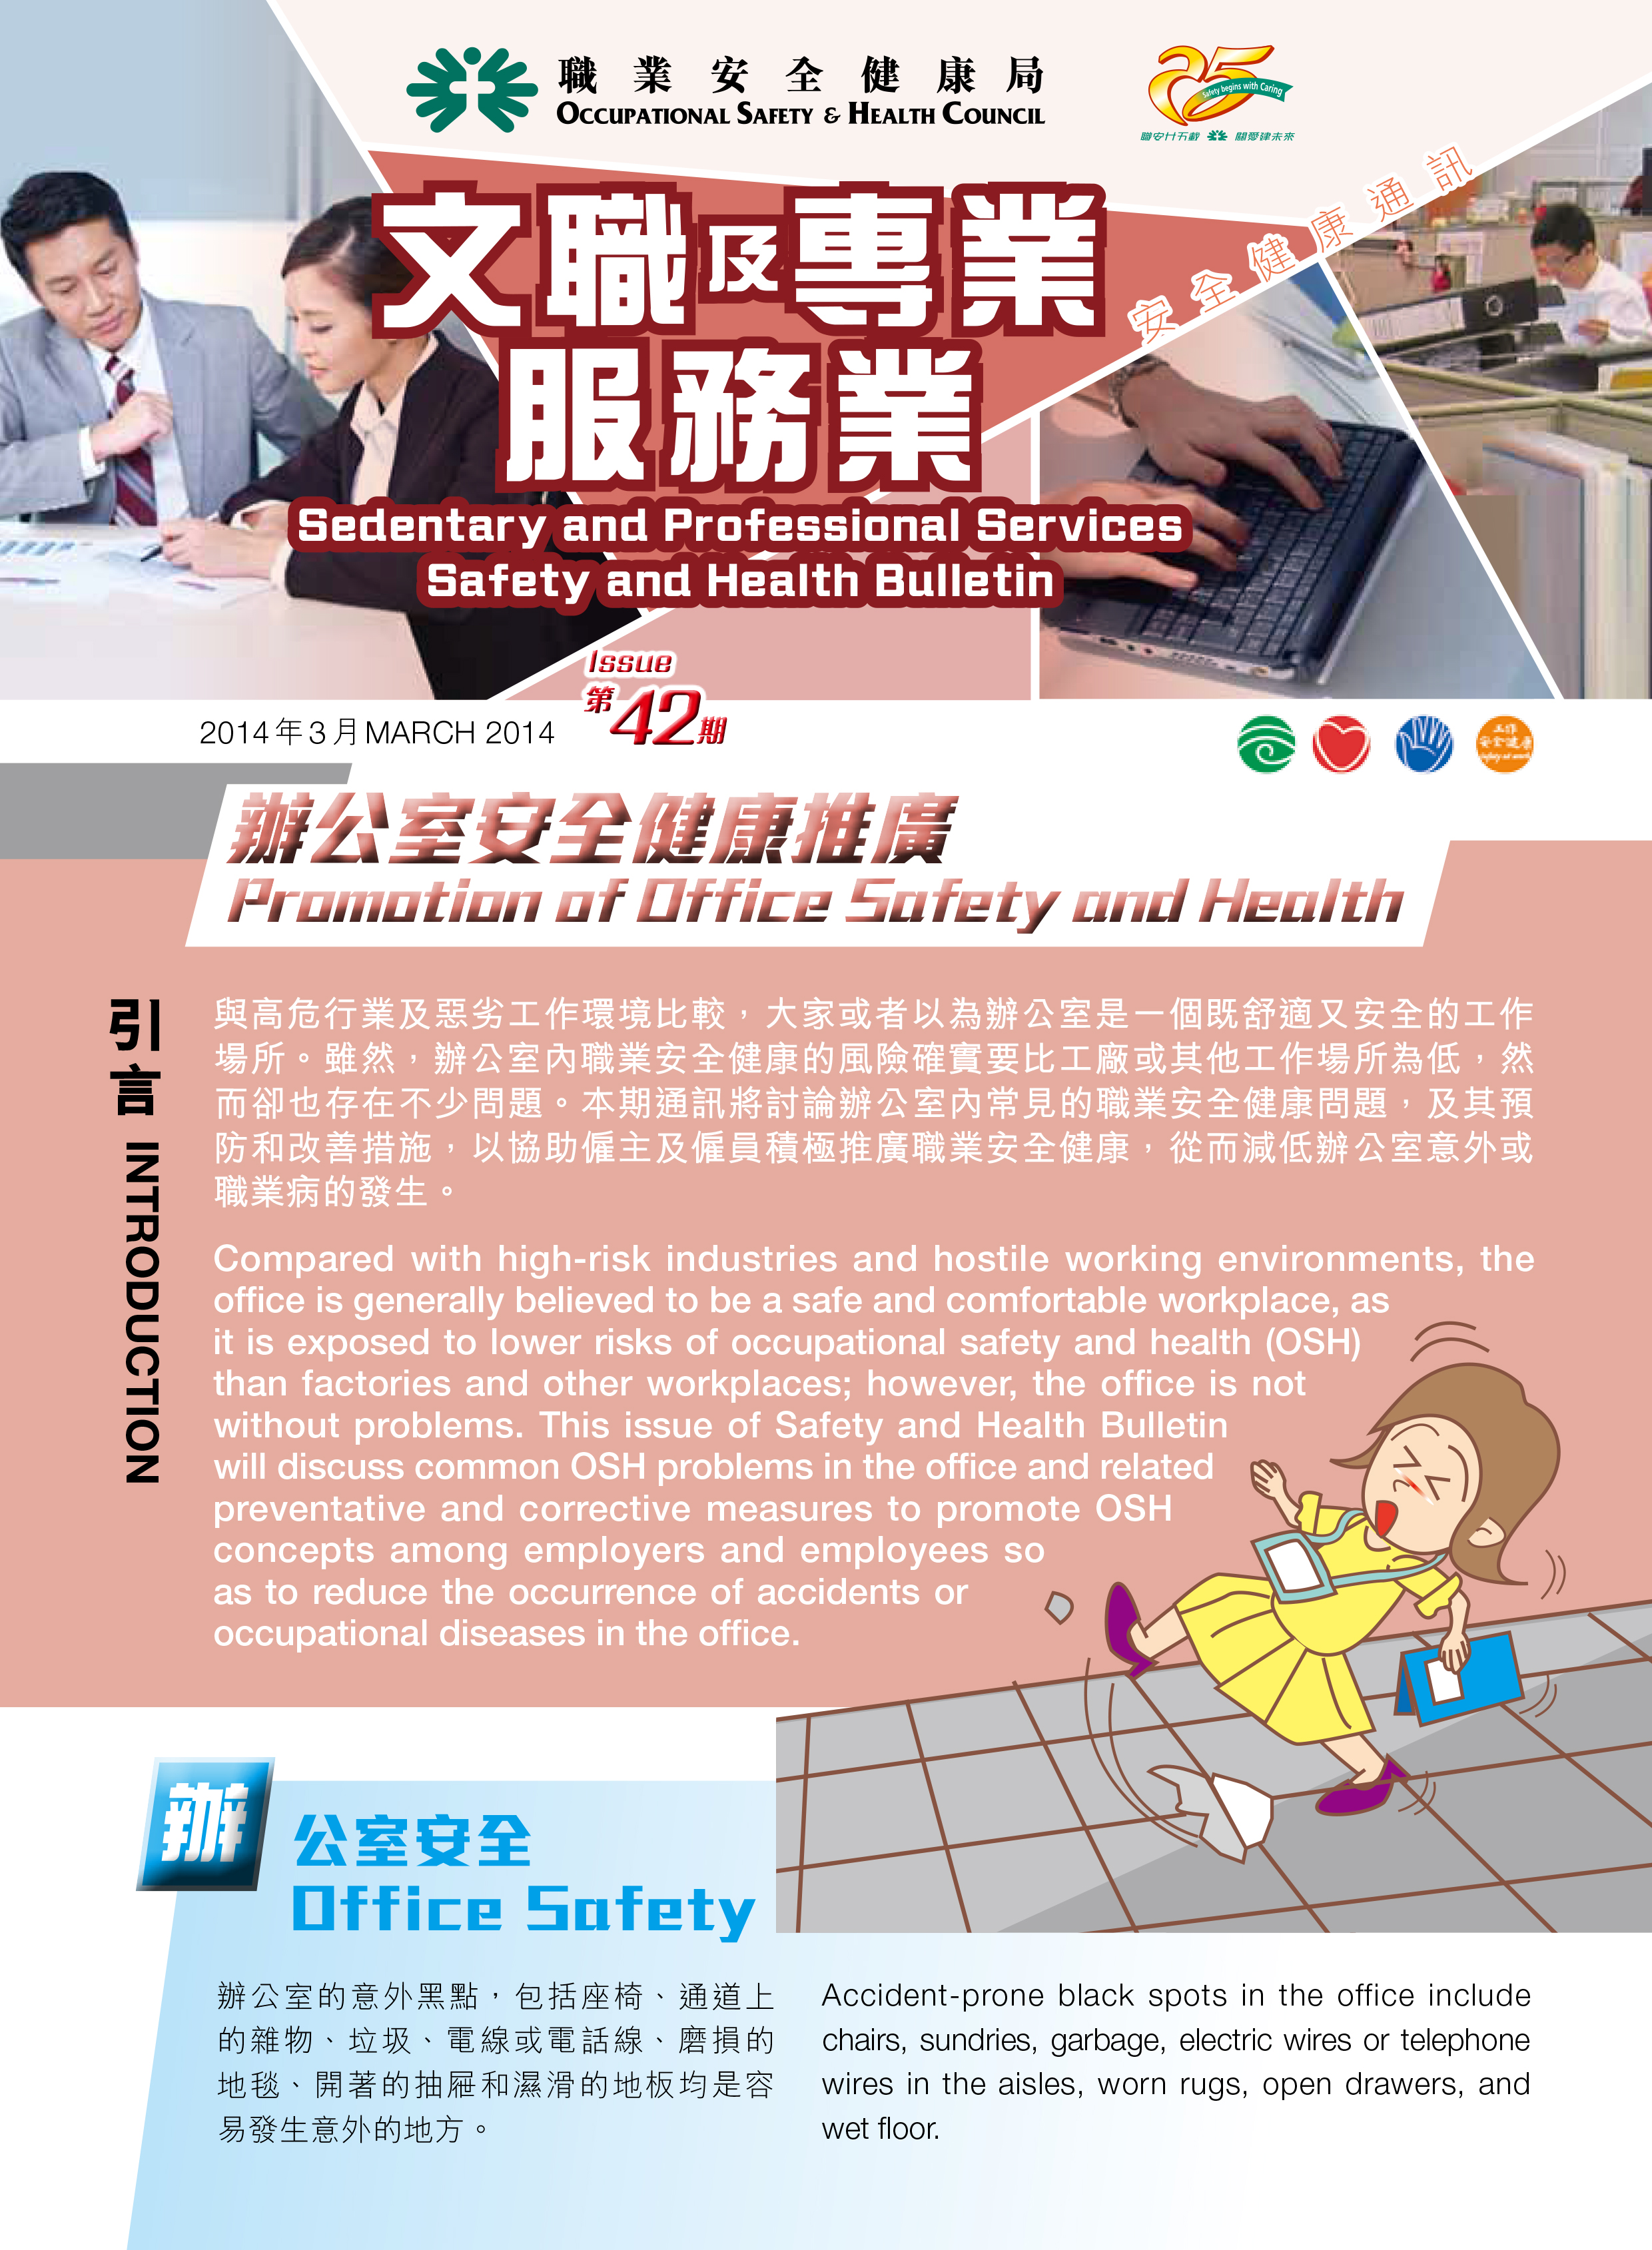 Safety and Health Bulletin: Promotion of Office Safety and Health(published by OSHC)